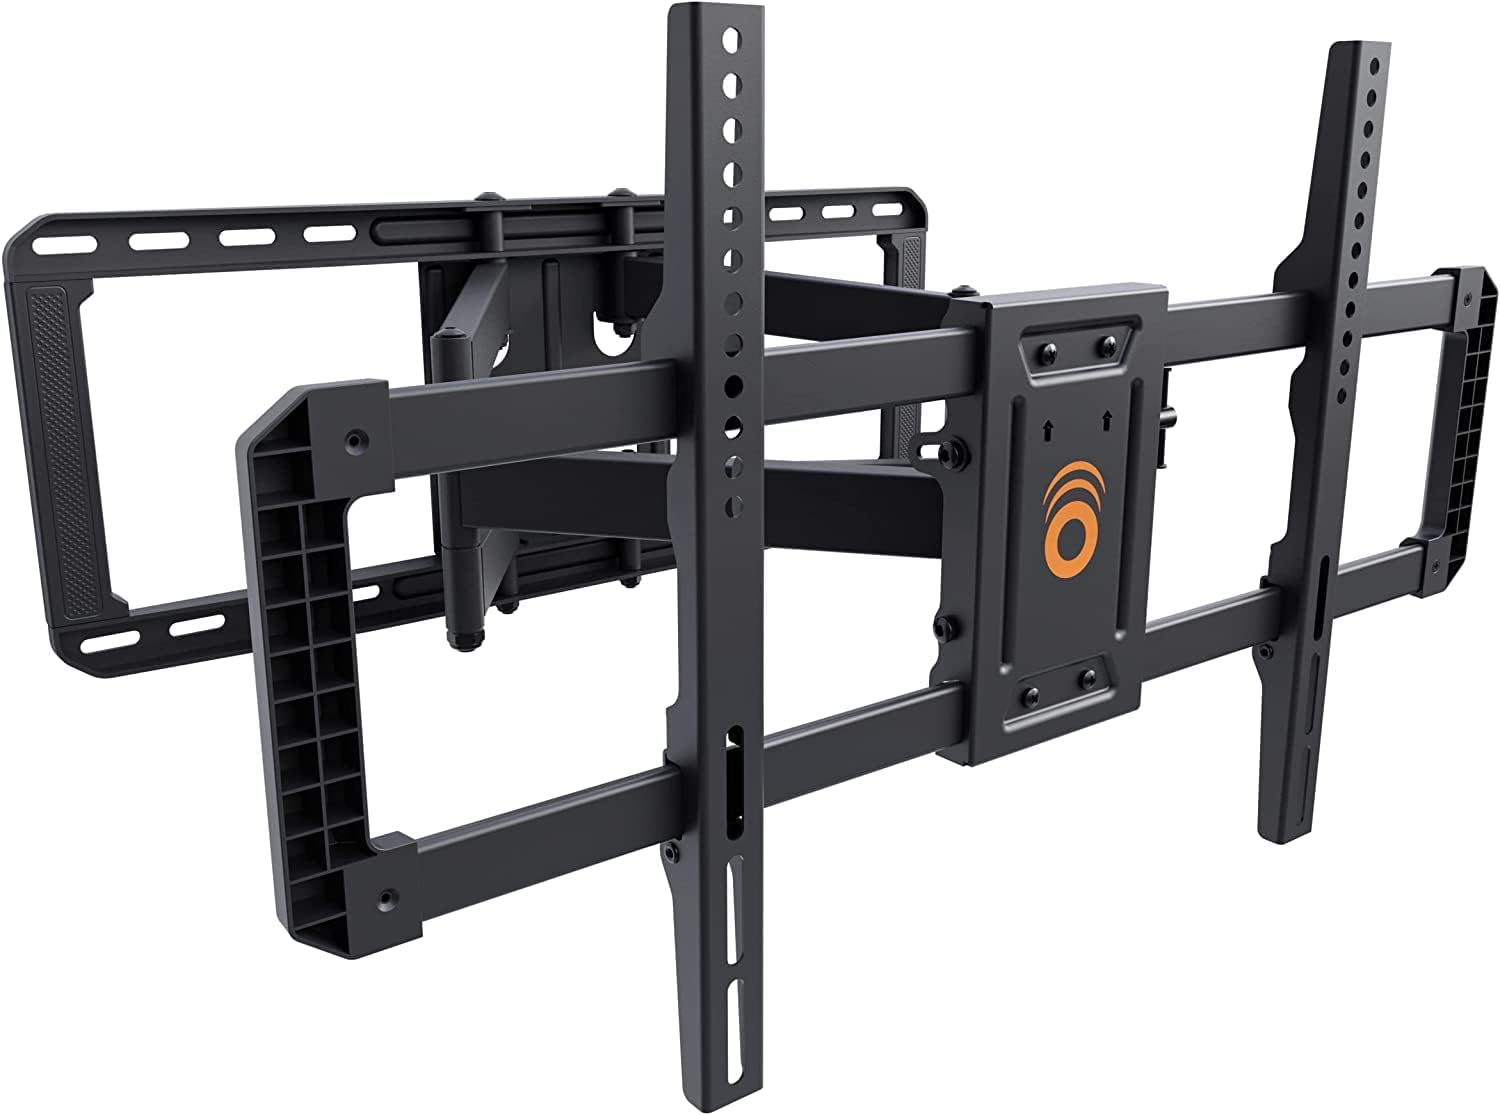 ECHOGEAR TV Wall Mount for Large TVs Up to 90